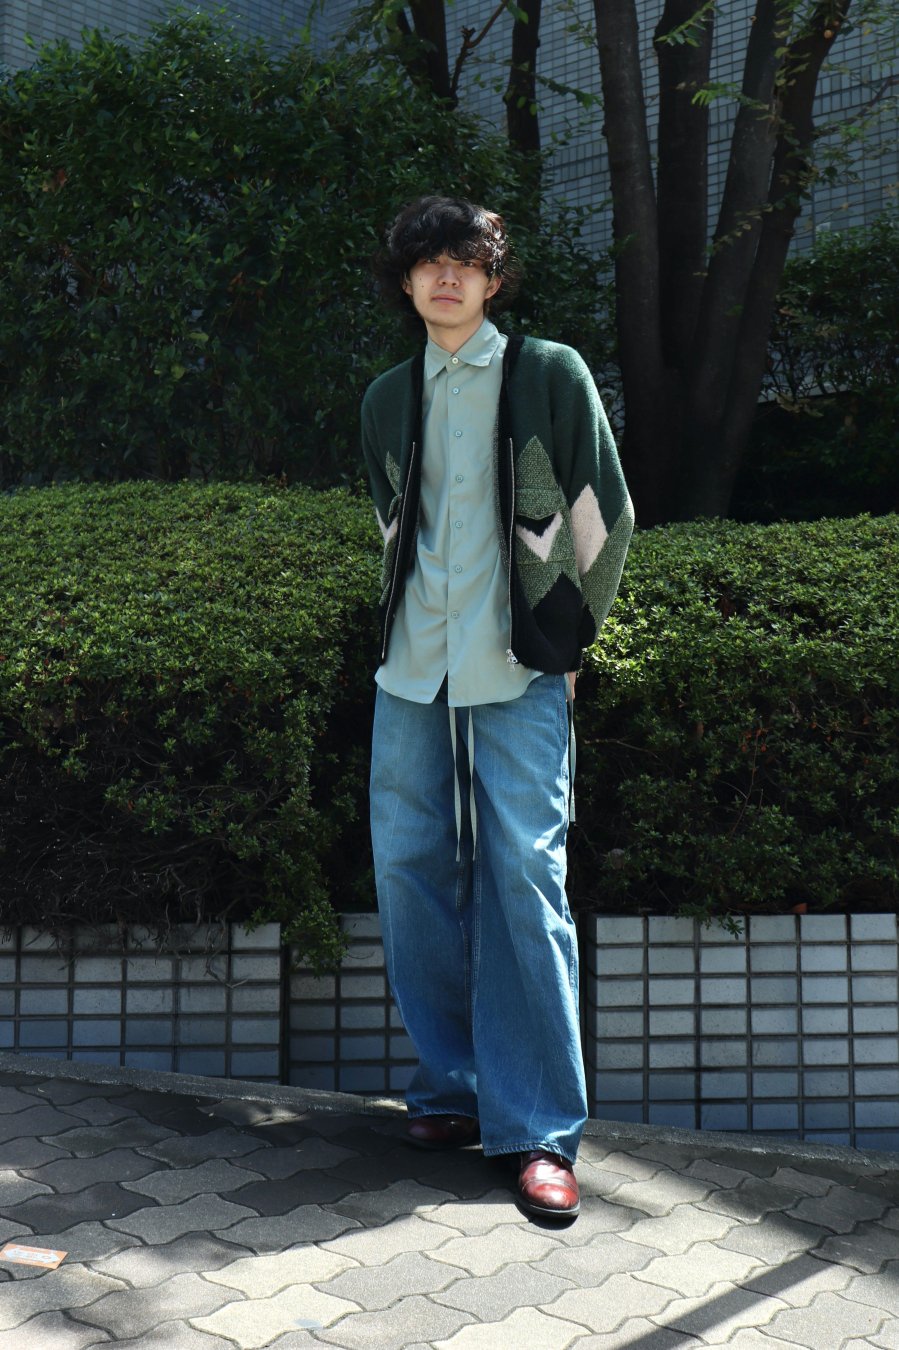 MASU（エムエーエスユー）のBAGGY FIT JEANS WALLET CHAINの通販サイト ...